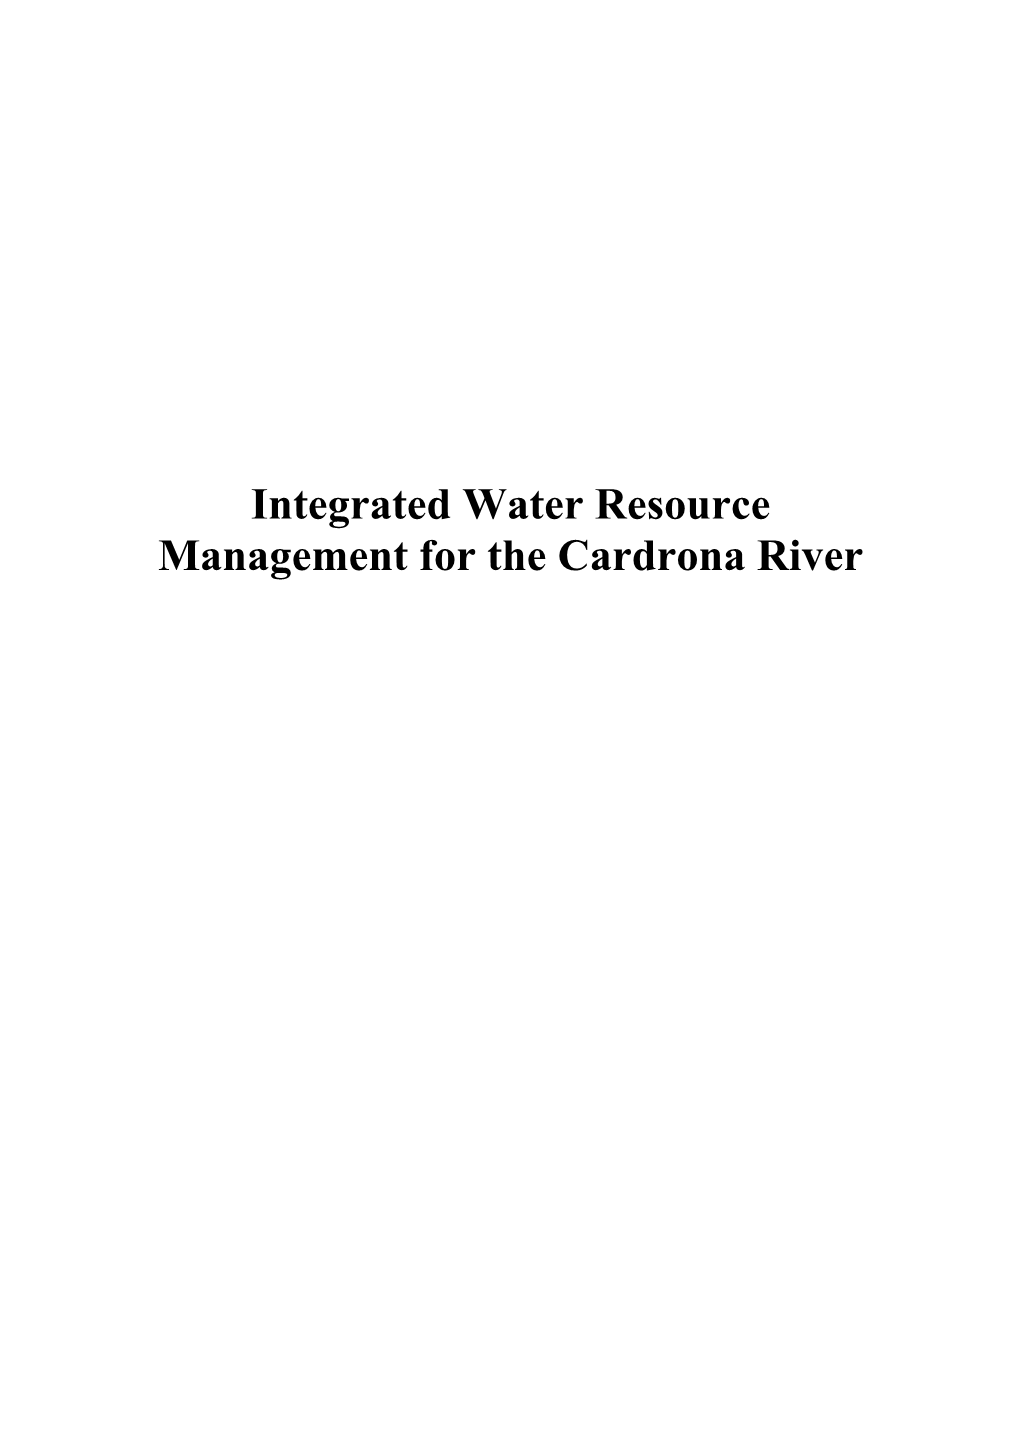 Integrated Water Resource Management for the Cardrona River